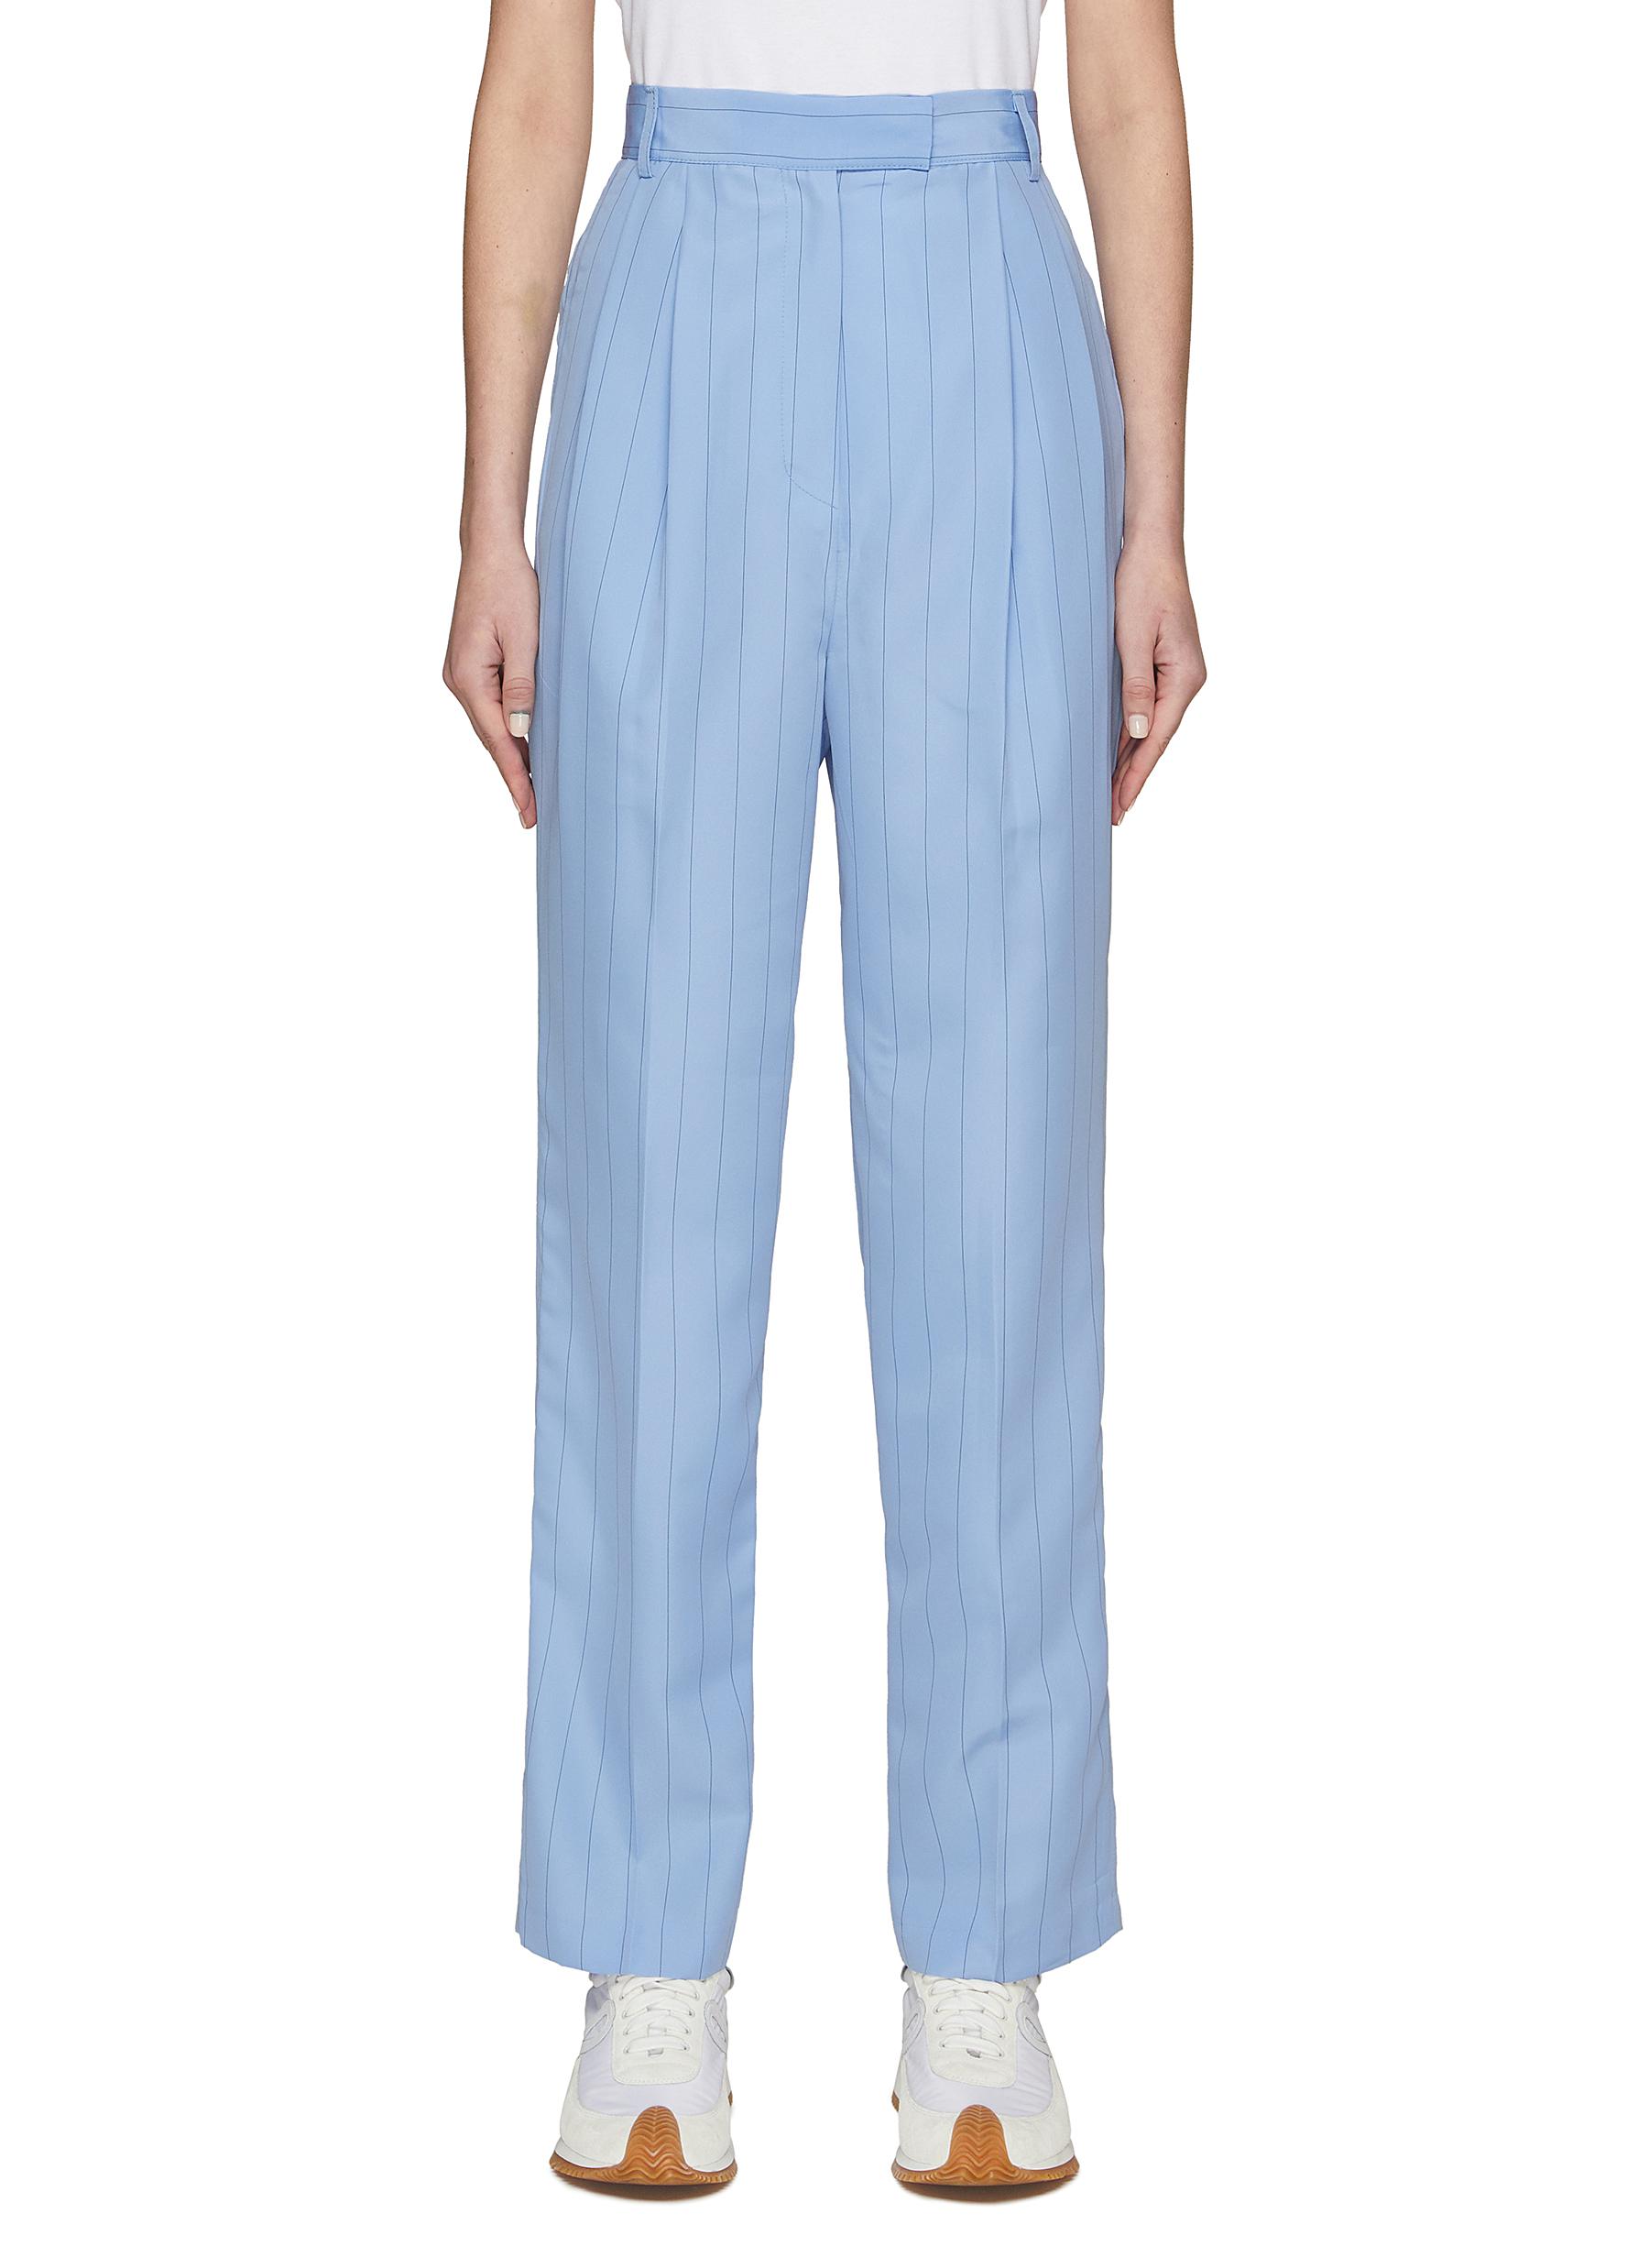 'Bea' Pleated Striped High Waist Straight Suiting Pants